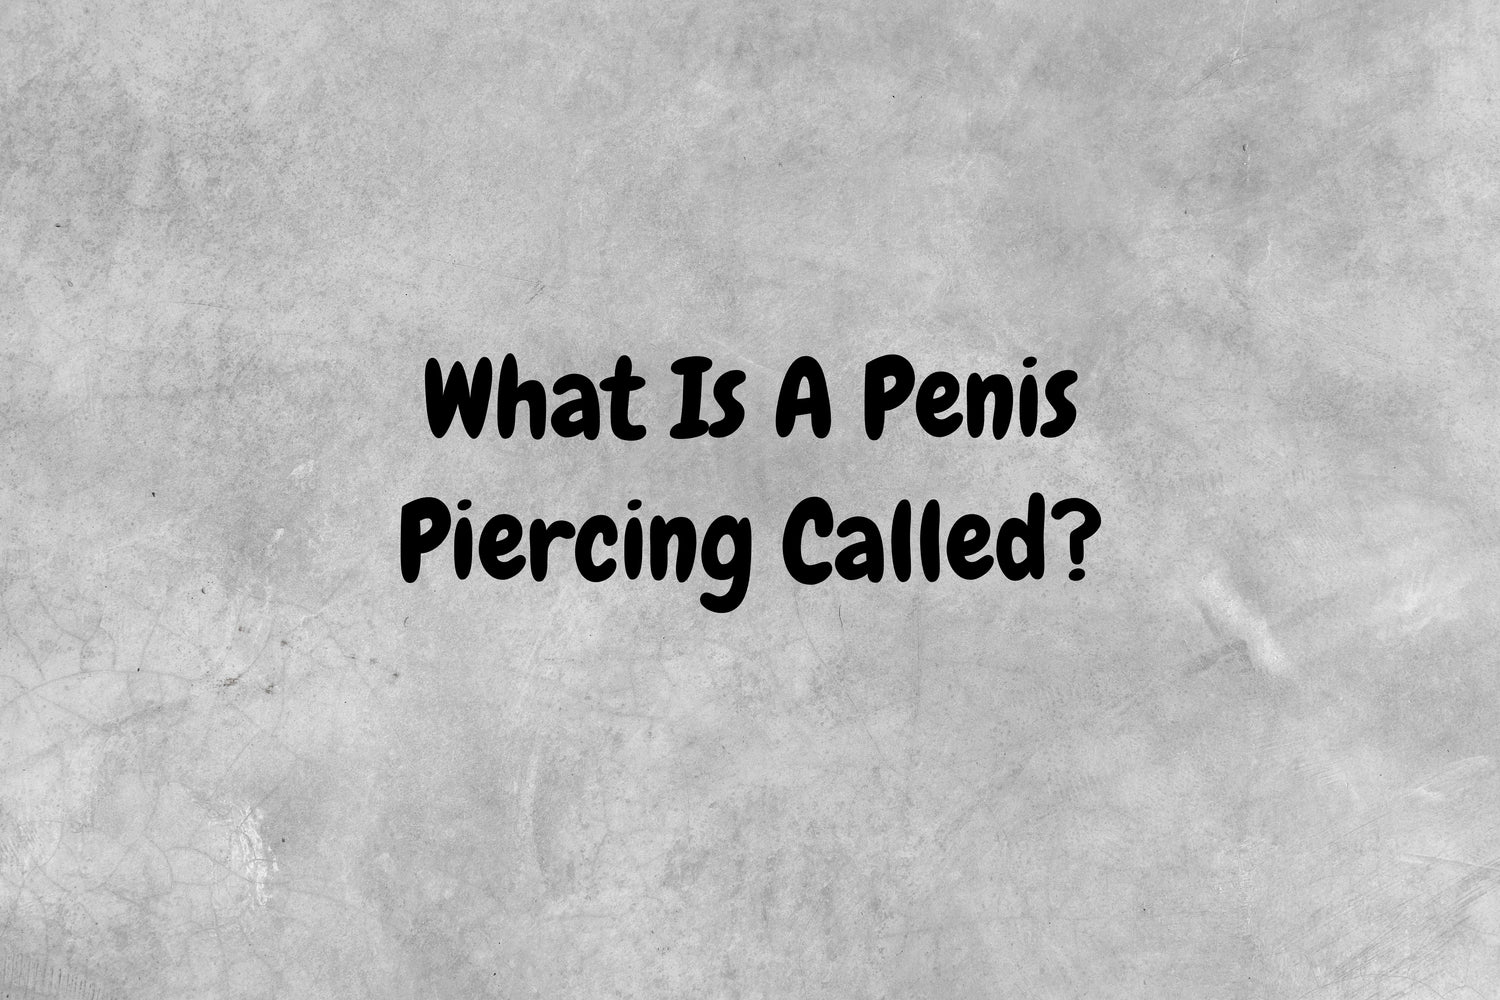 Gray background with text reading - What is a penis piercing called?